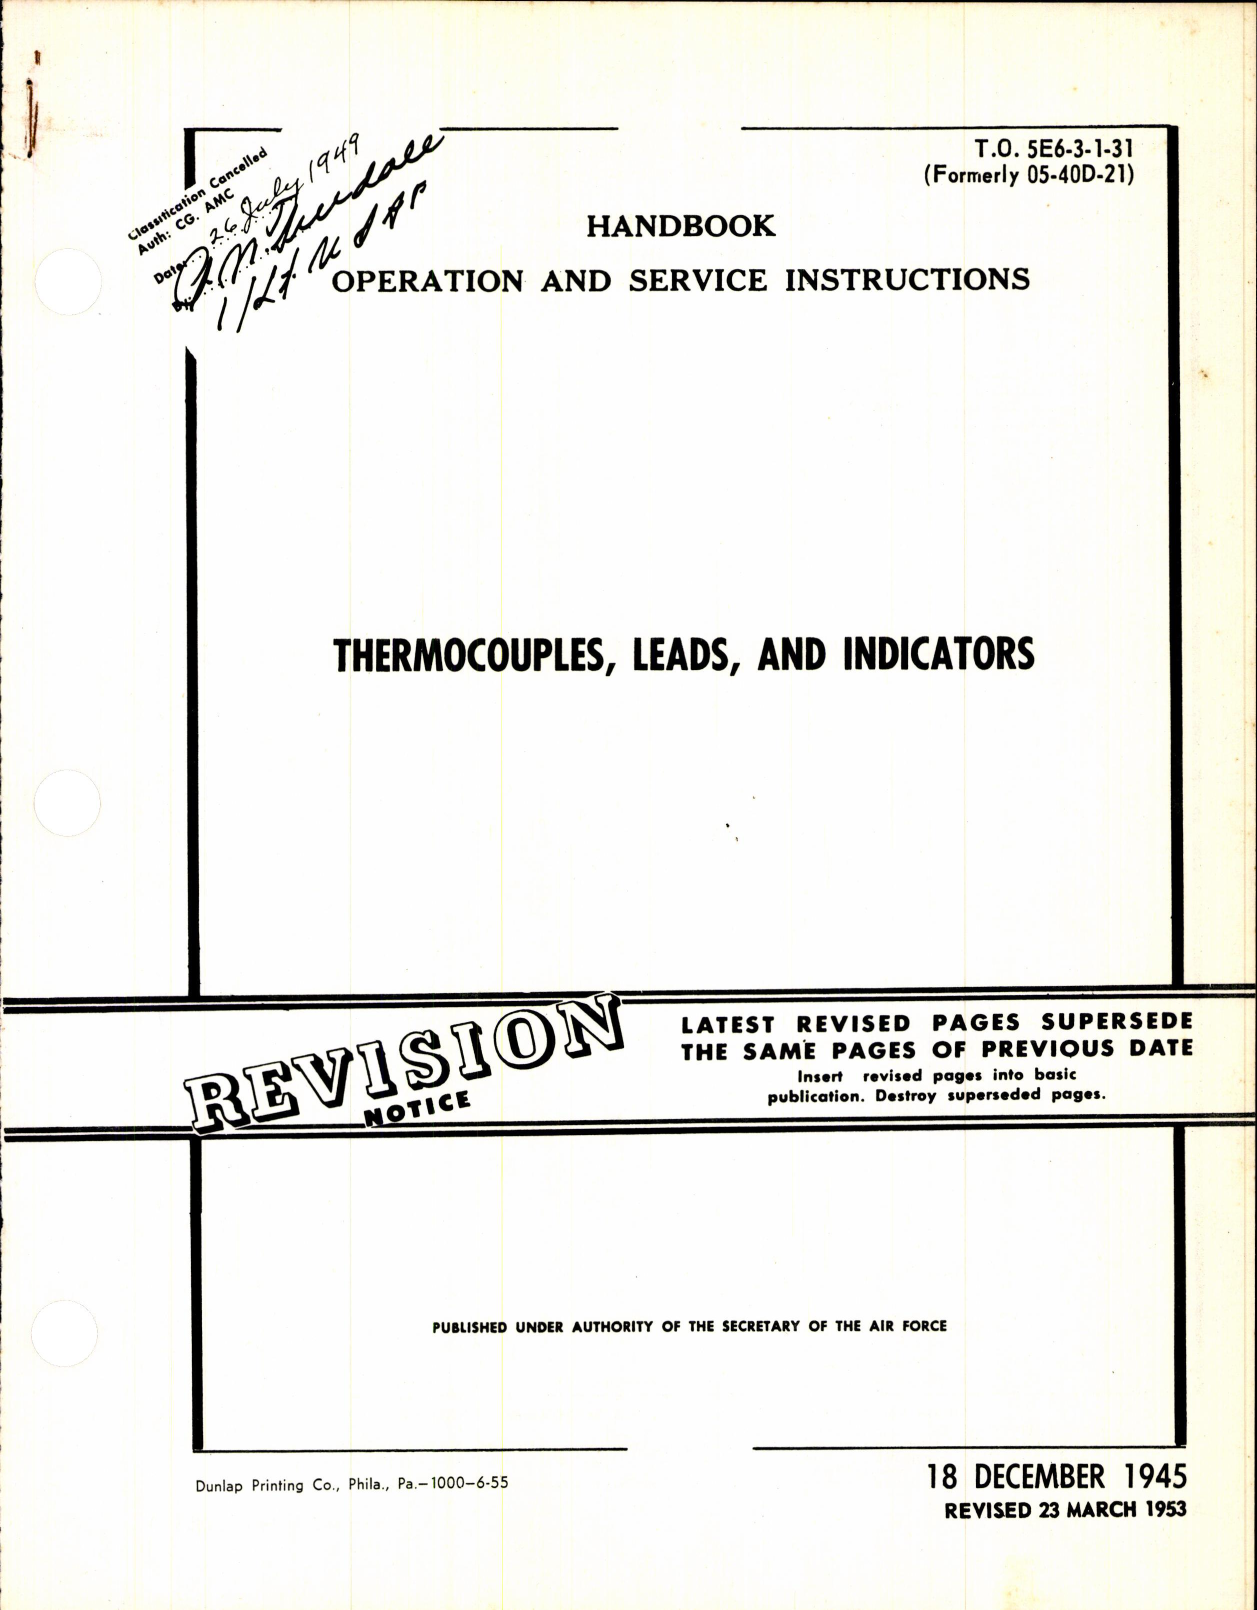 Sample page 1 from AirCorps Library document: Operation & Instructions for Thermocouples, Leads & Indicators